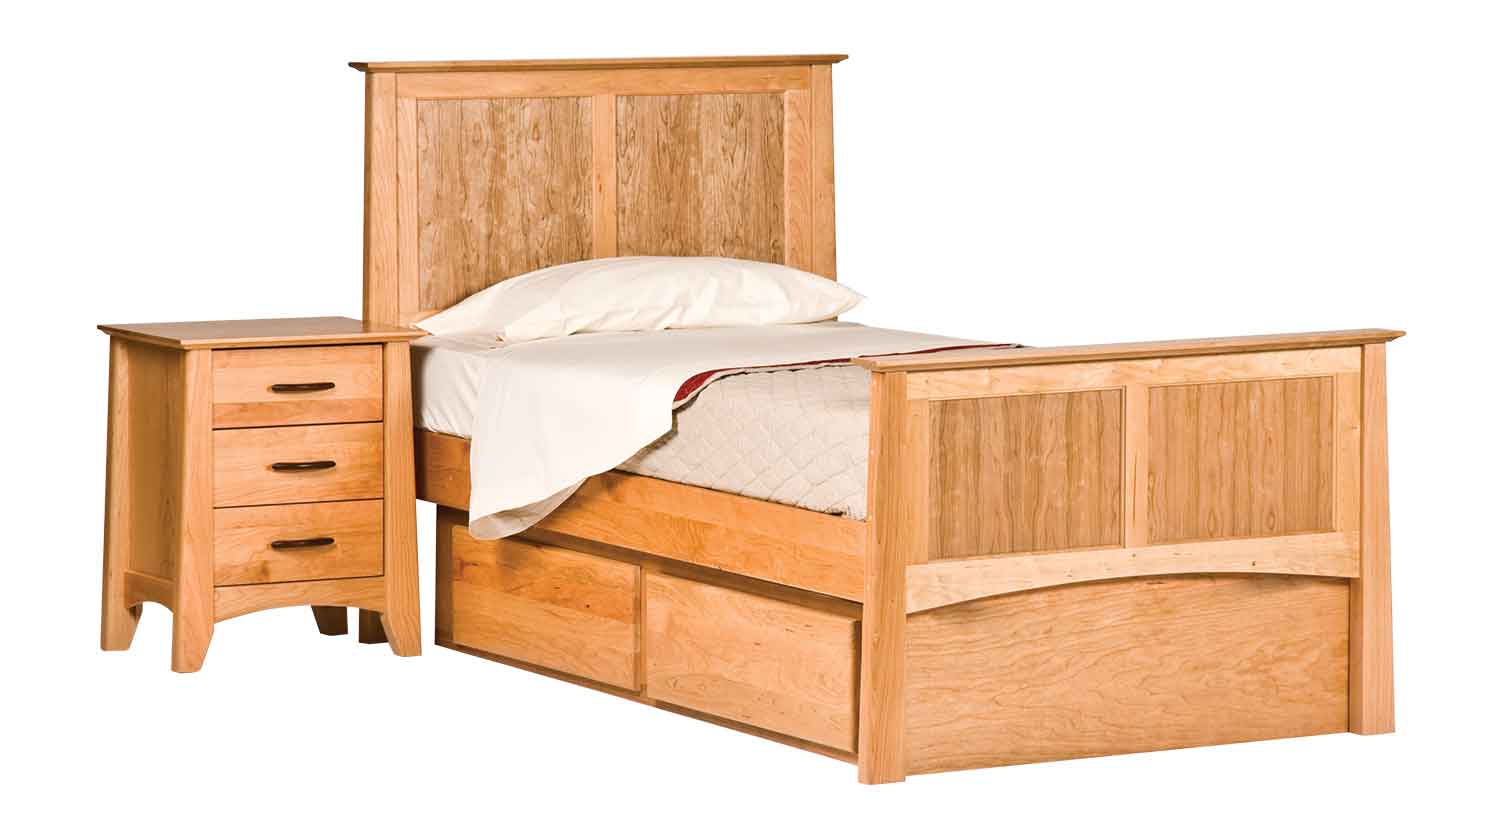 wooden bedroom set by Woodforms